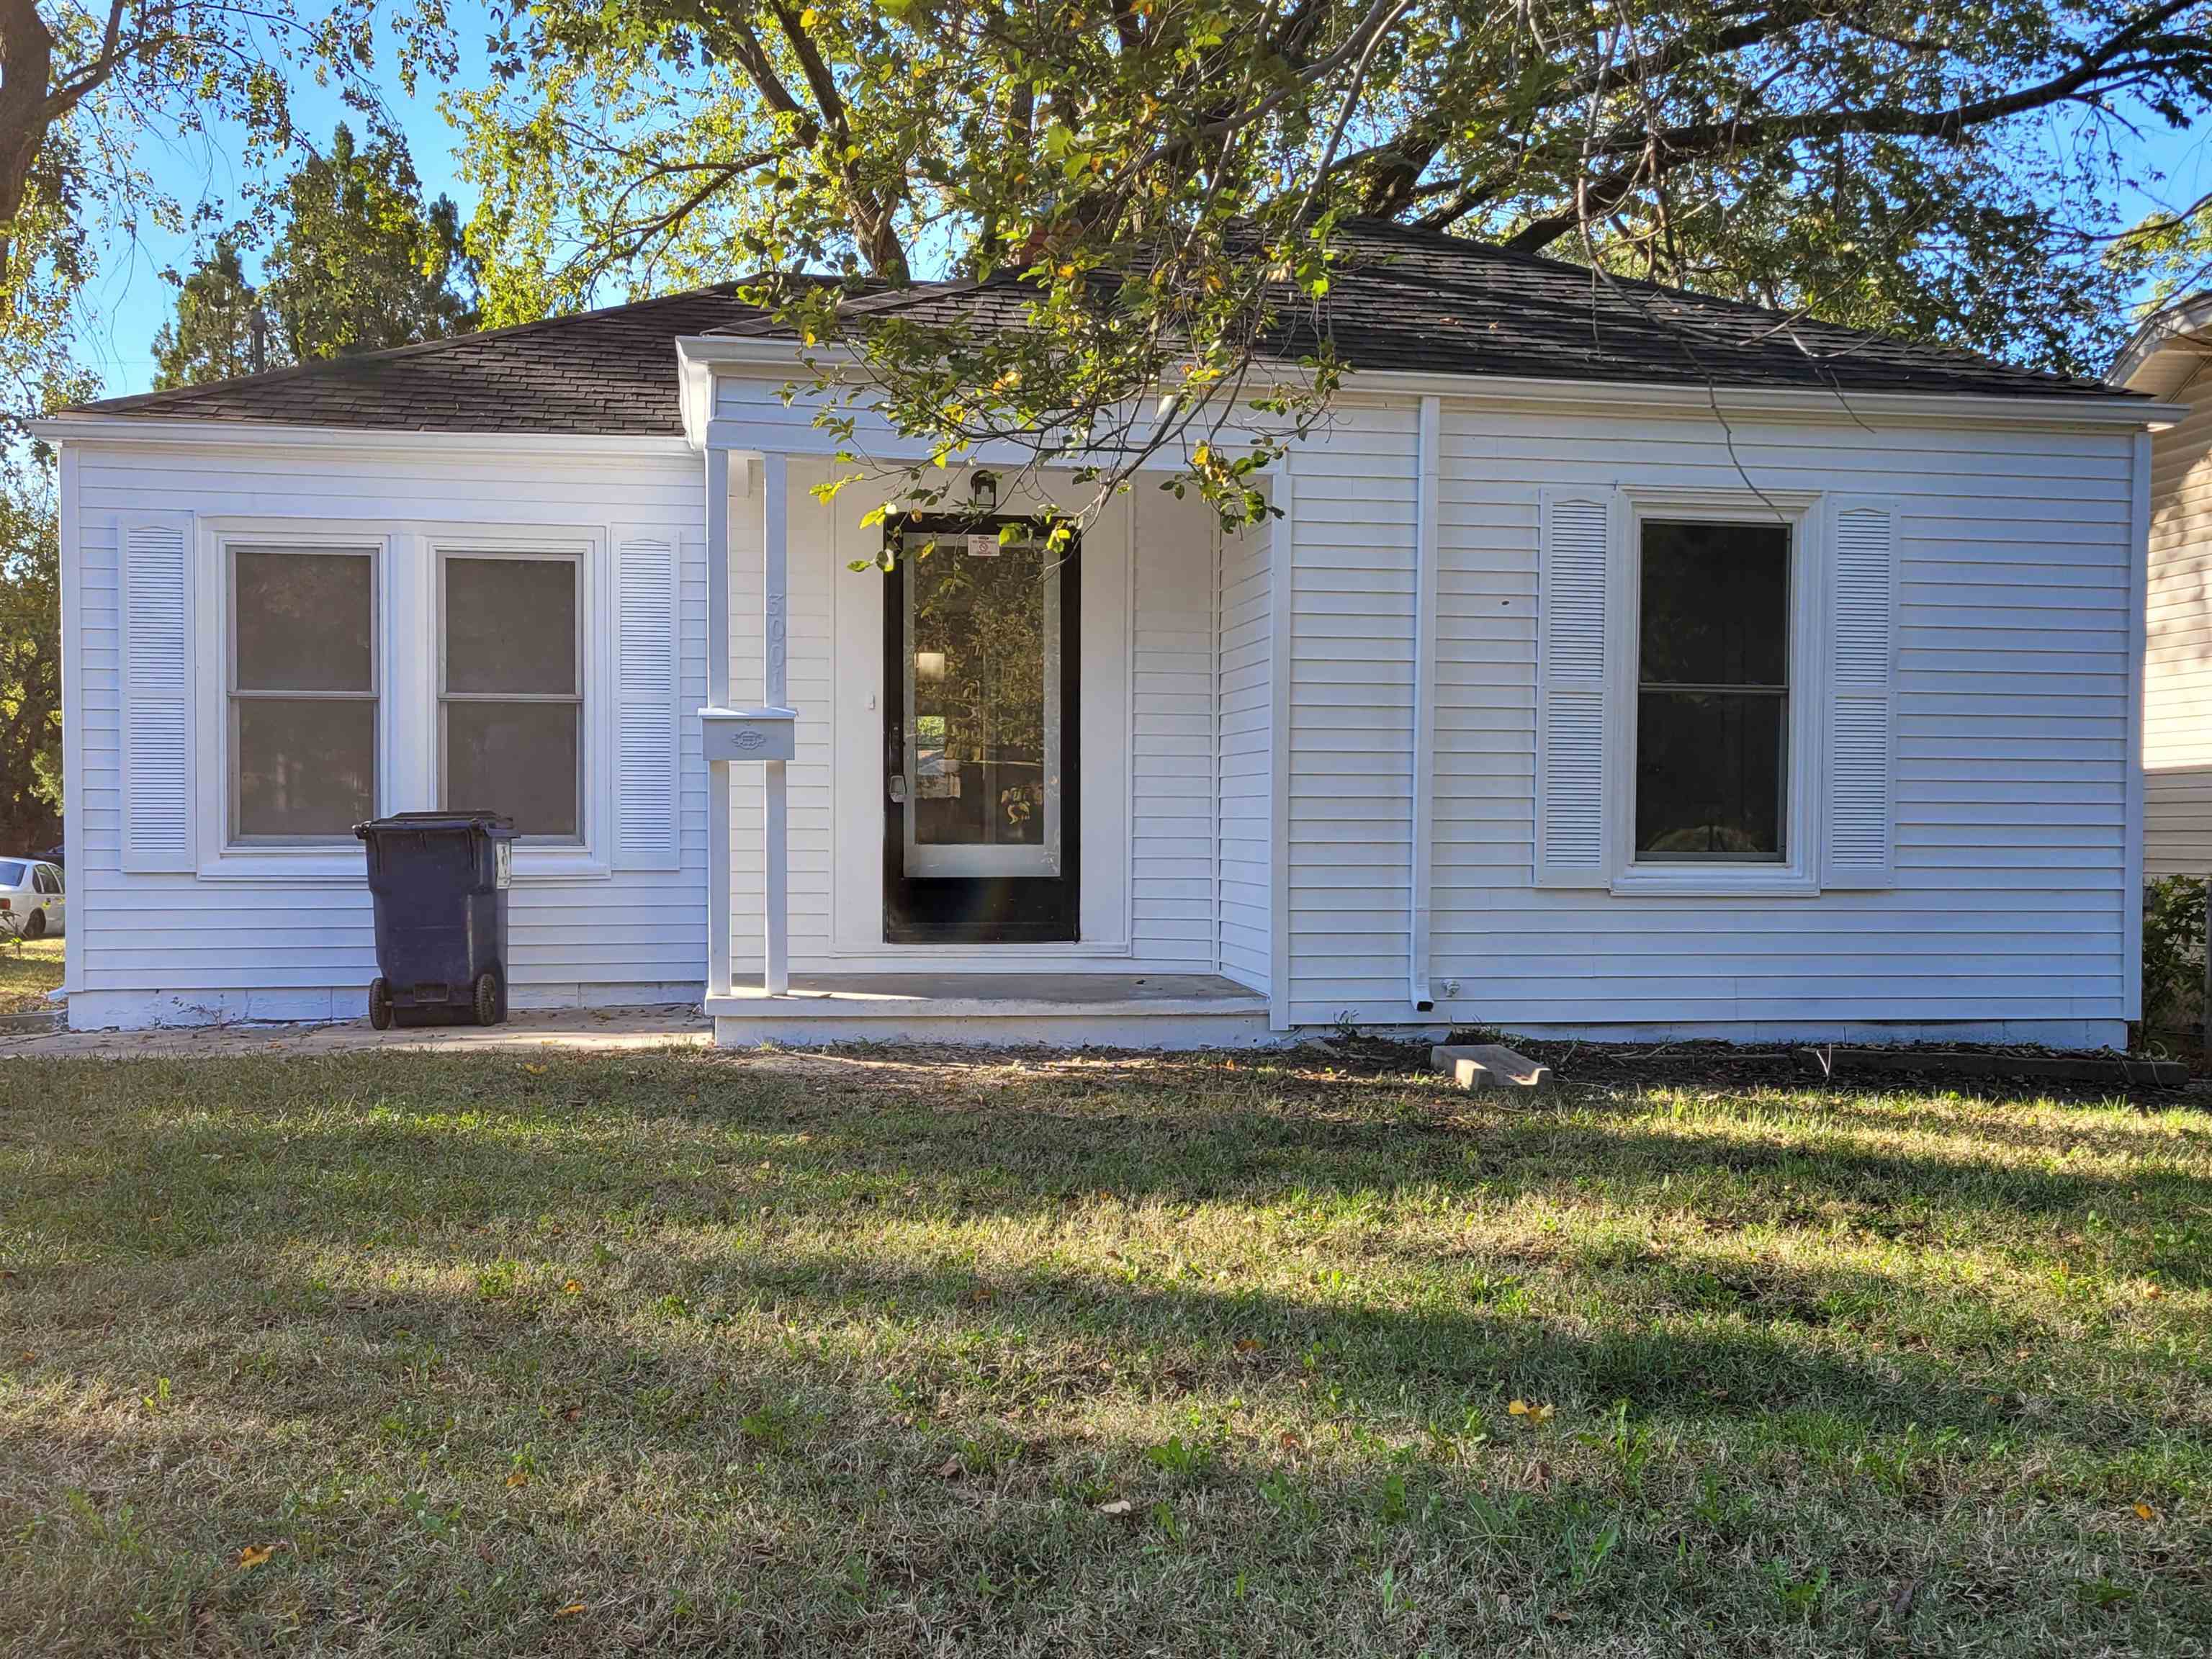 Don’t miss this turnkey investment opportunity near the Delano District. This home offers 2 bedrooms